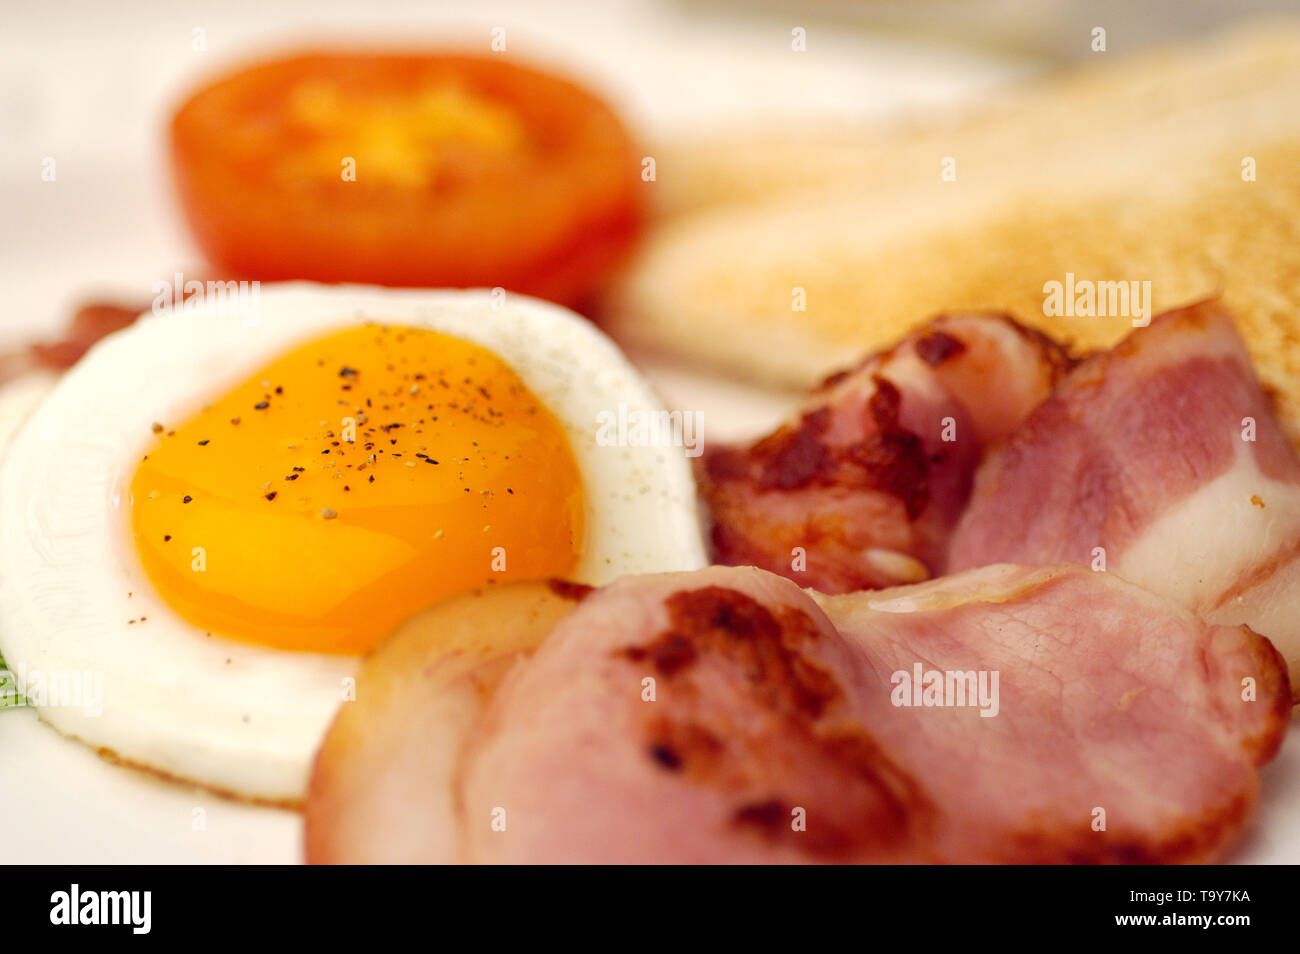 Close up of fried breakfast foods Stock Photo